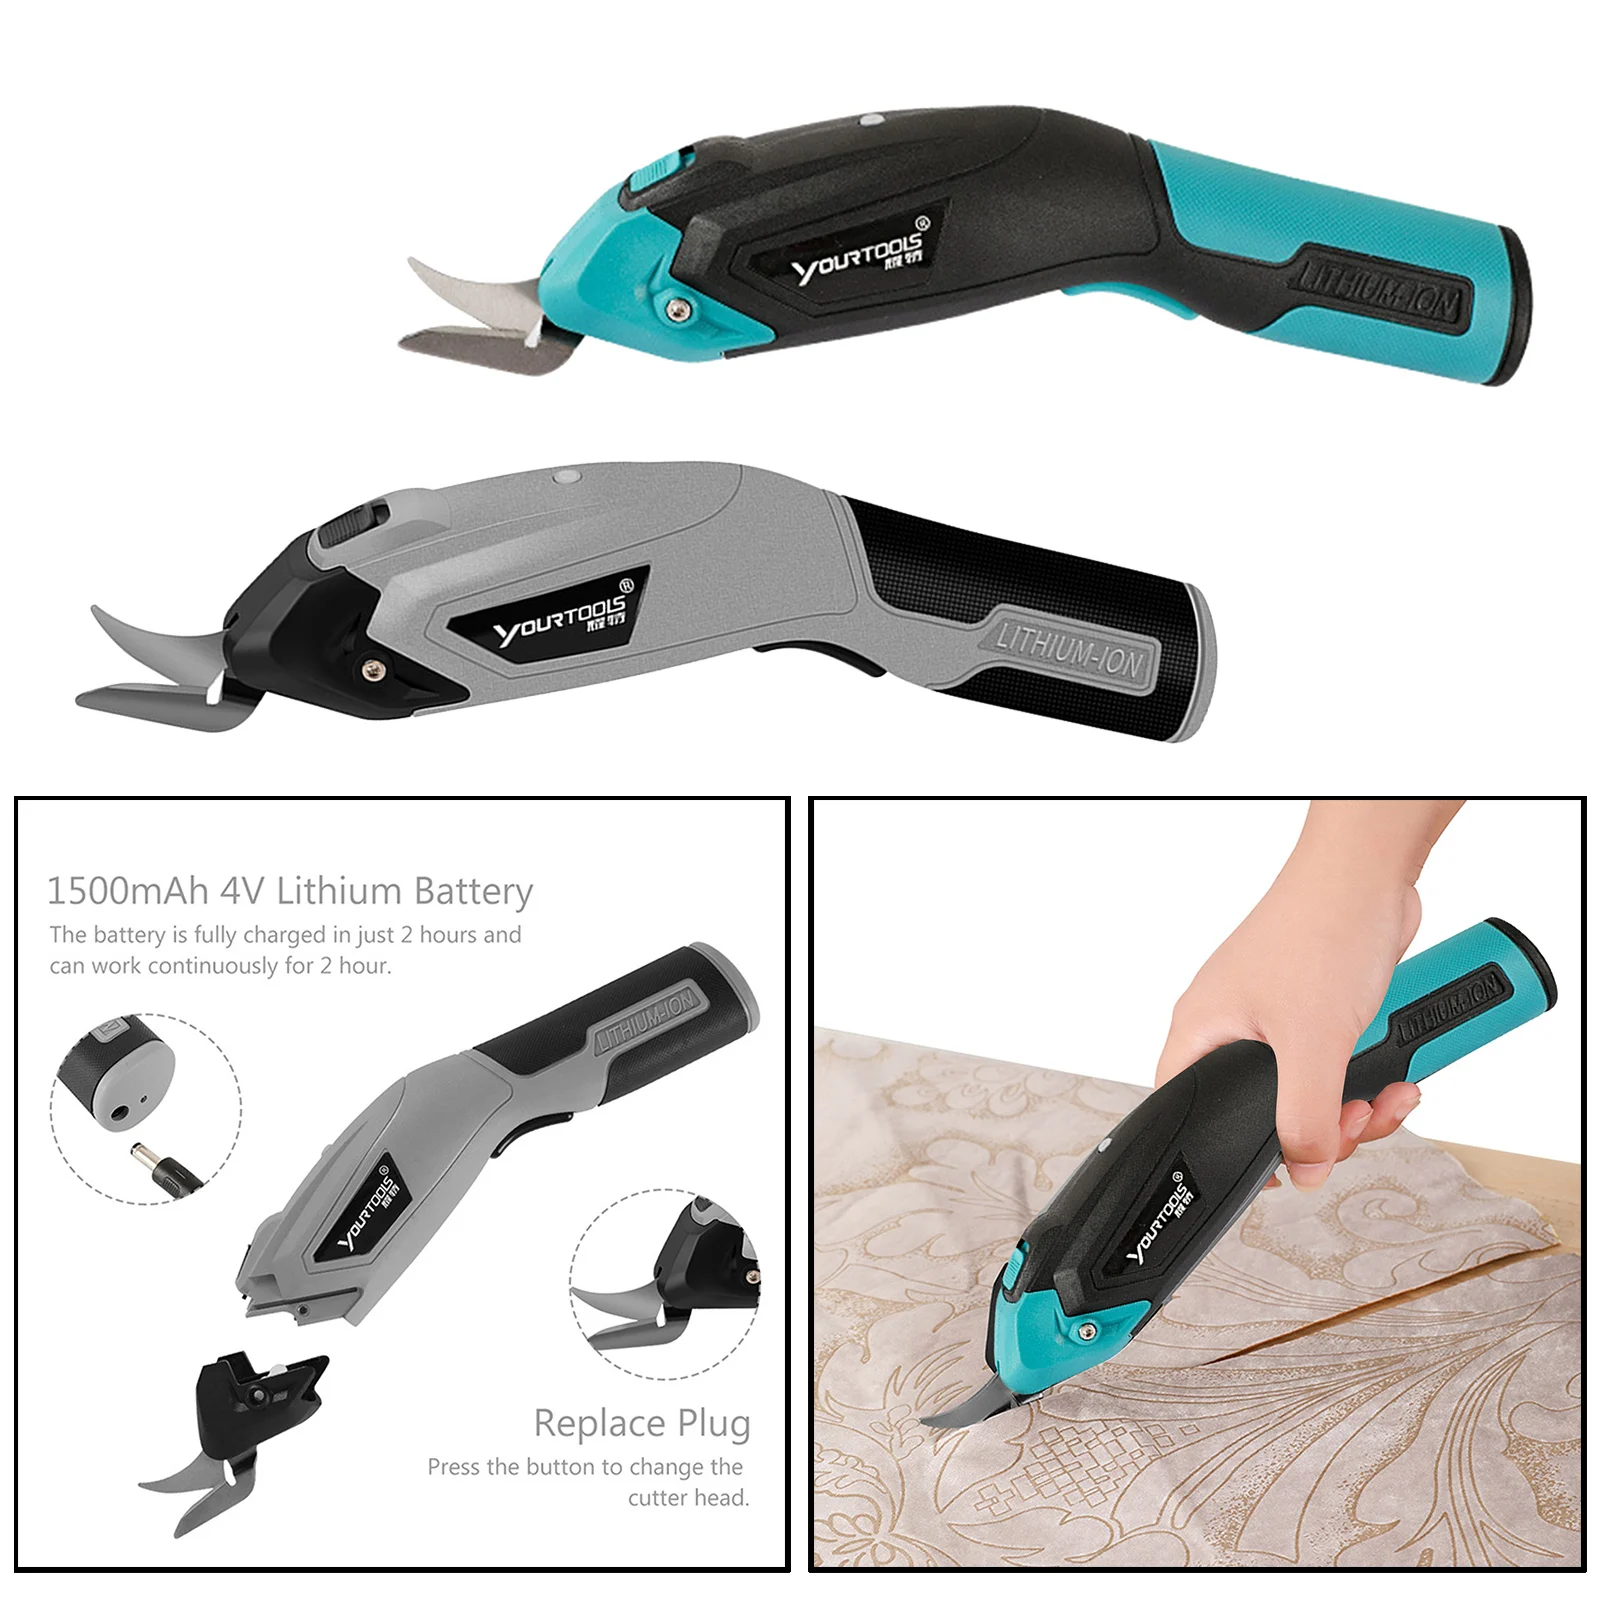 Portable Electric Scissors USB Rechargeable Box Cutter for Leather Crafts Cardboard Shears Carpet Cutting Tool